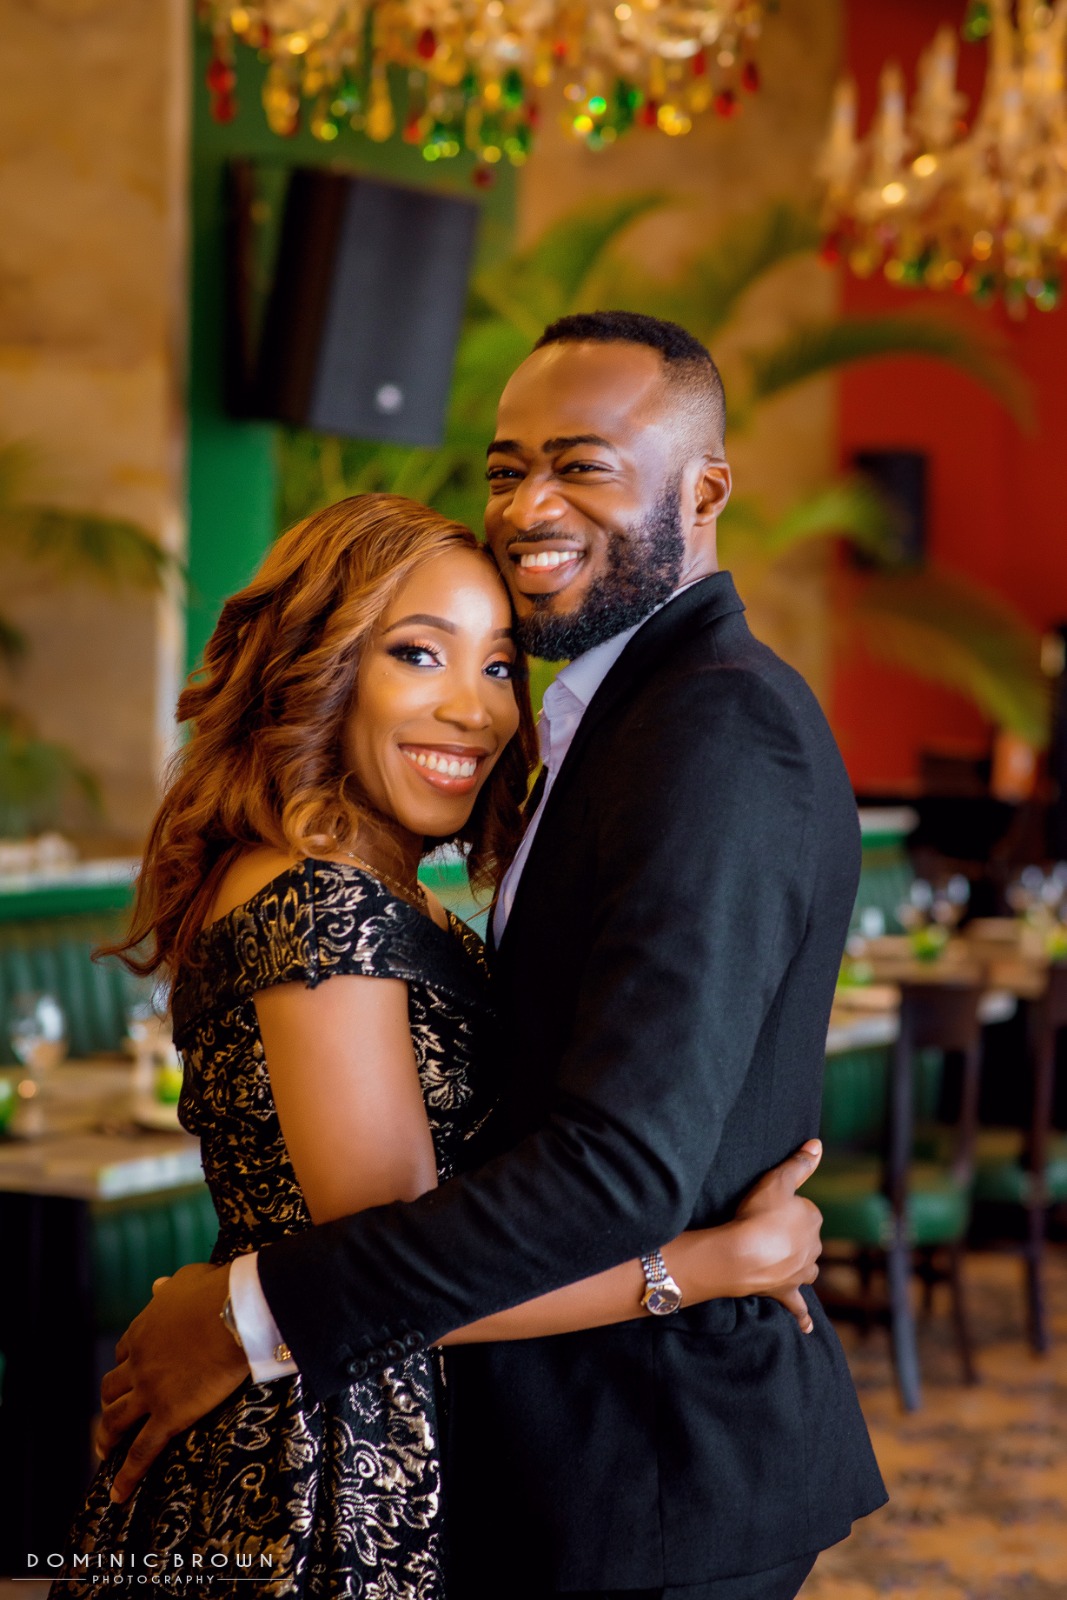 Our Love Story – Lore & Uche